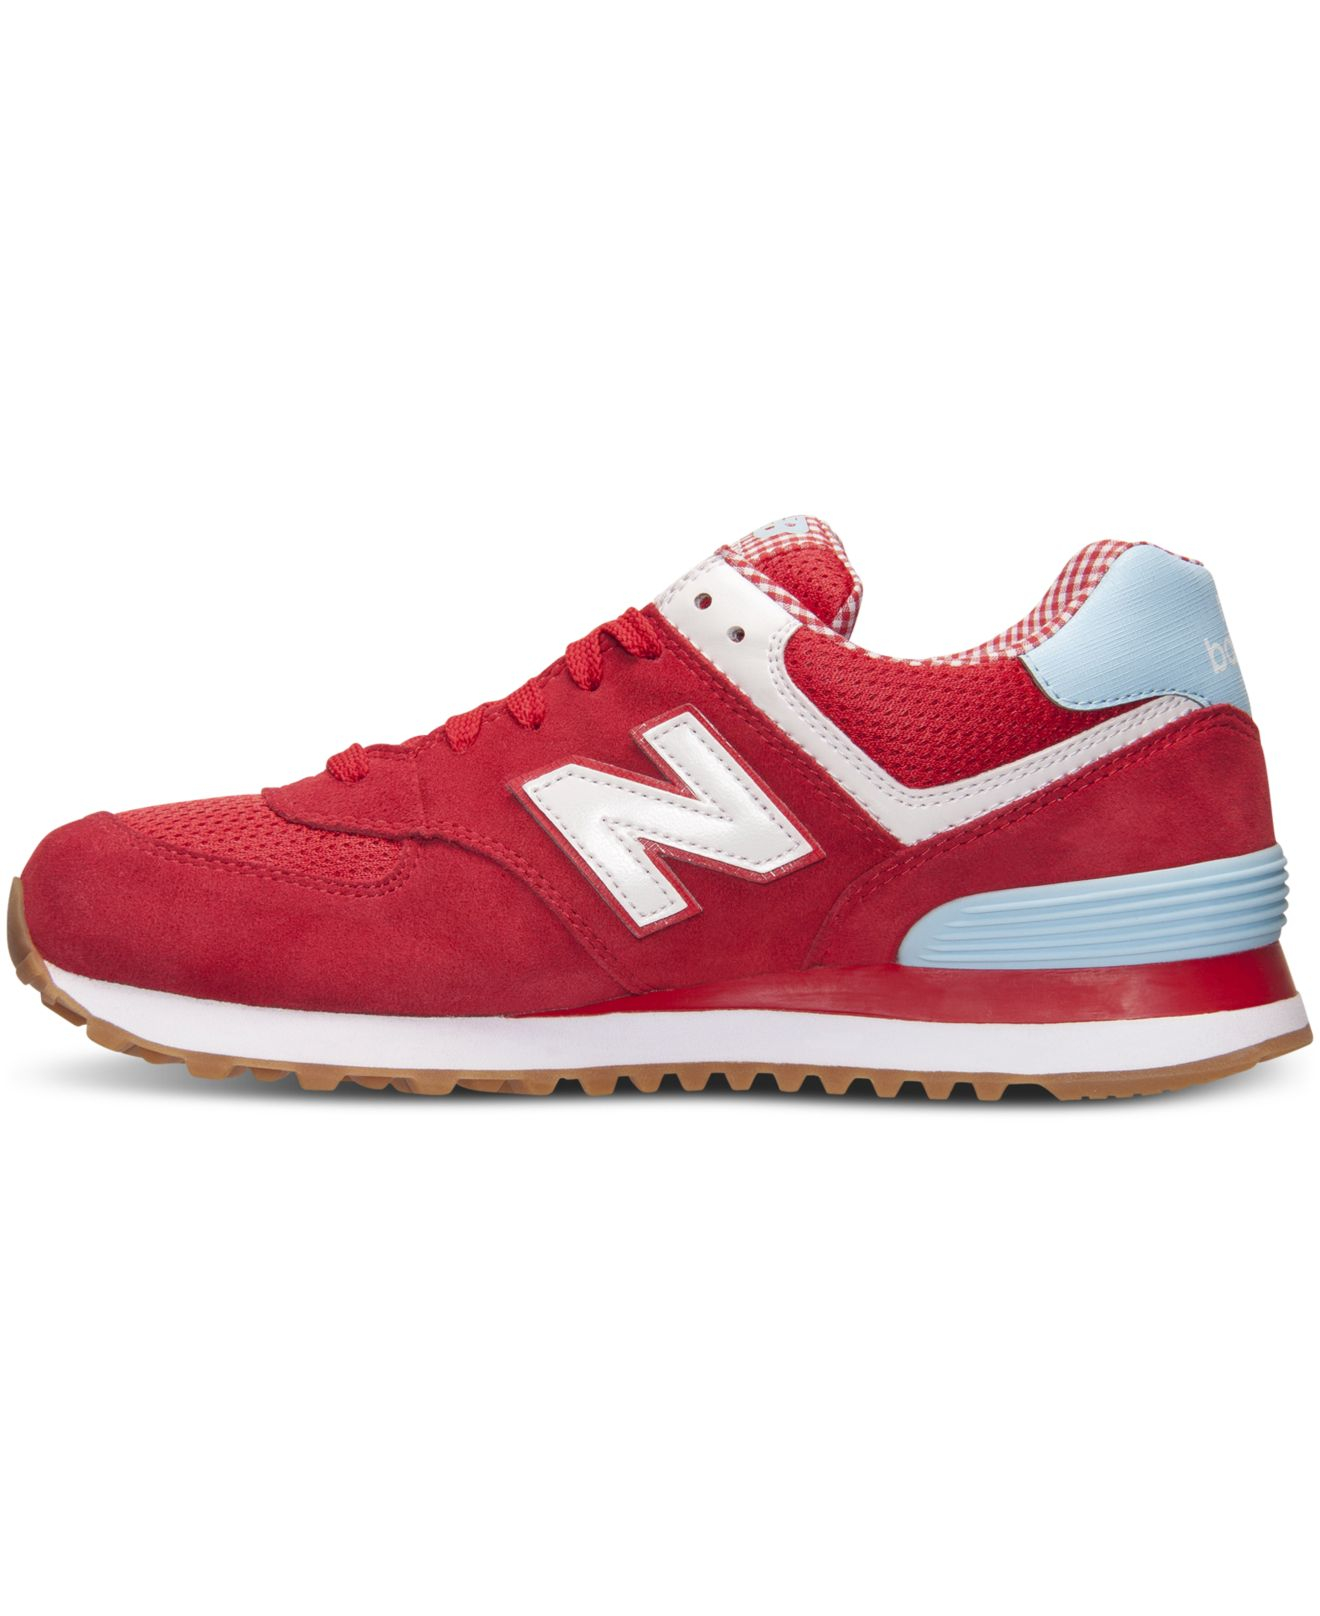 New Balance Suede 574 Casual Low-Top Sneakers in Red/White (Red) - Lyst